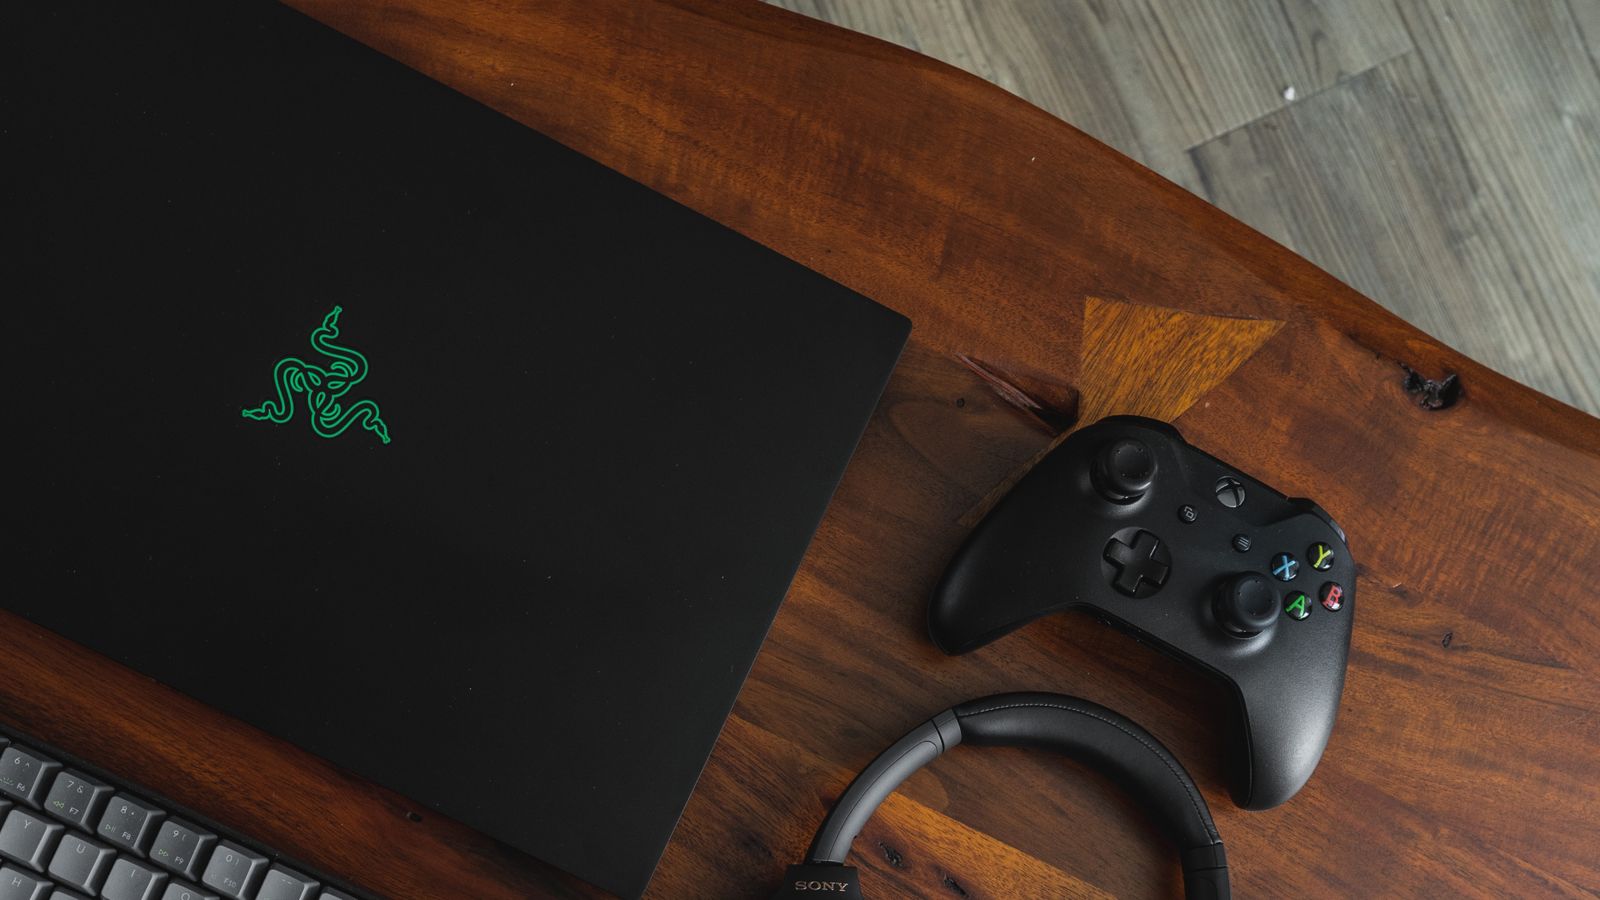 Black Razer gaming laptop on a wood table next to a black Xbox controller.